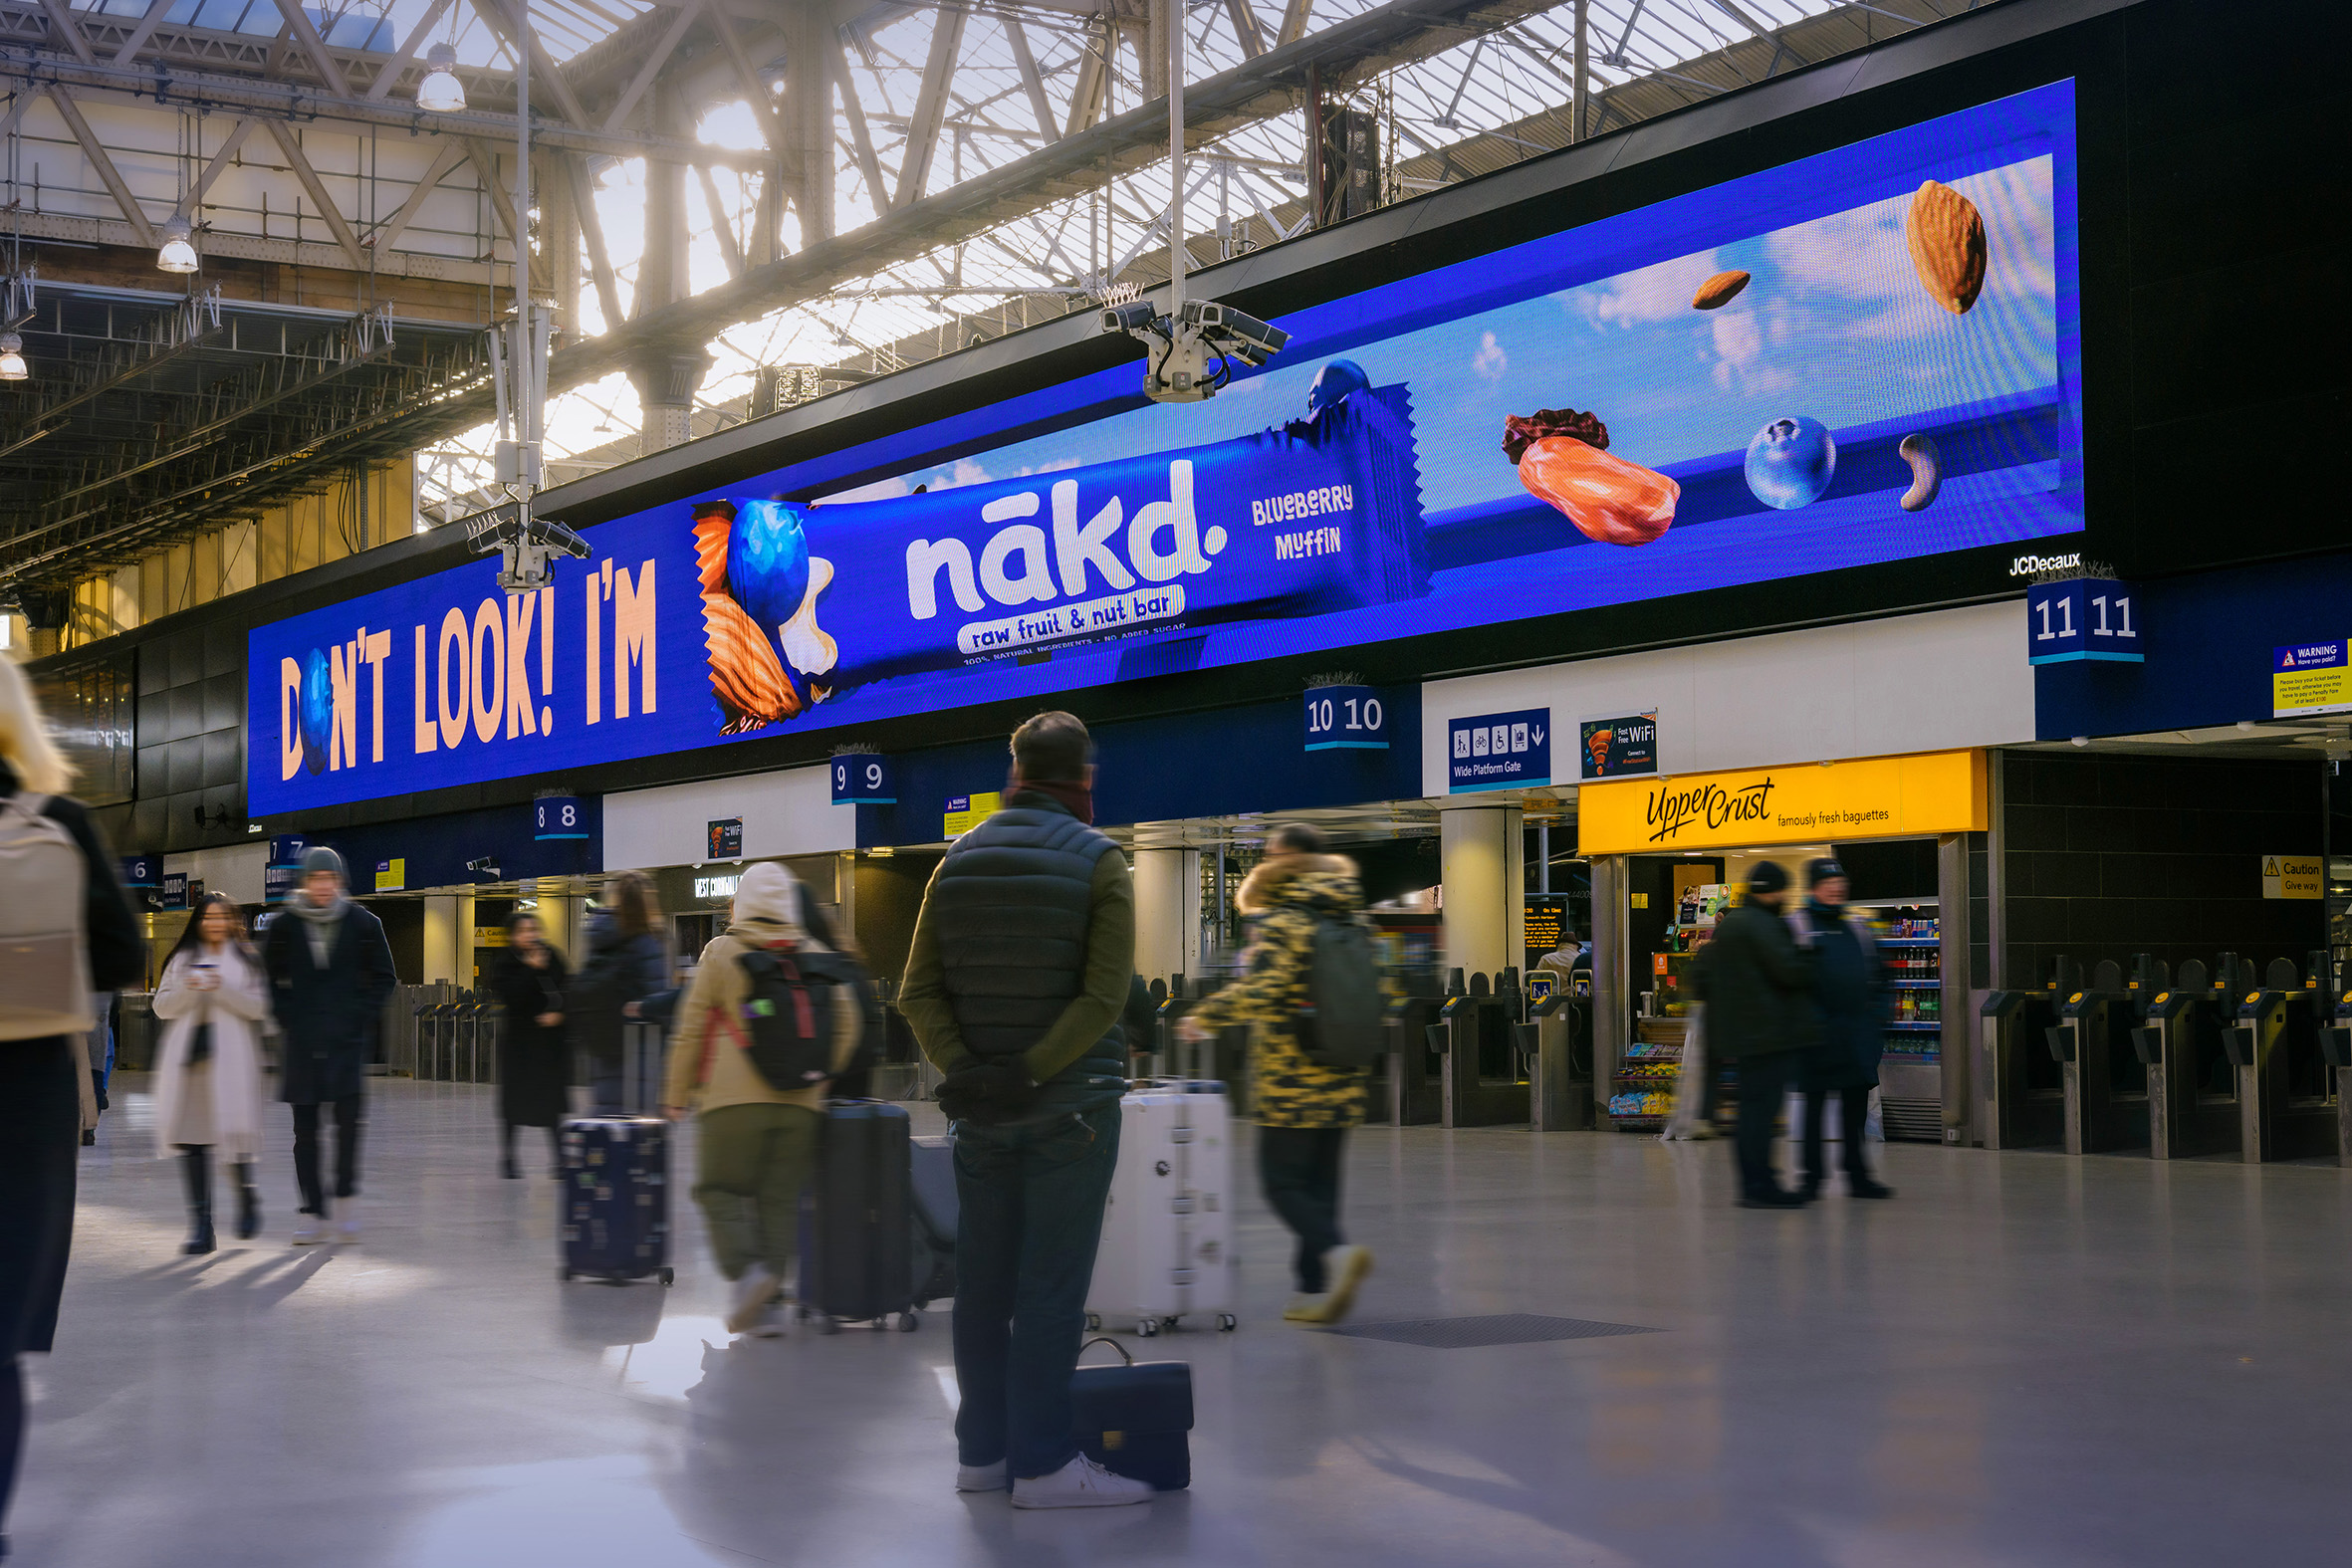 JCDecaux UK launches new 3D OOH products with nākd campaign  